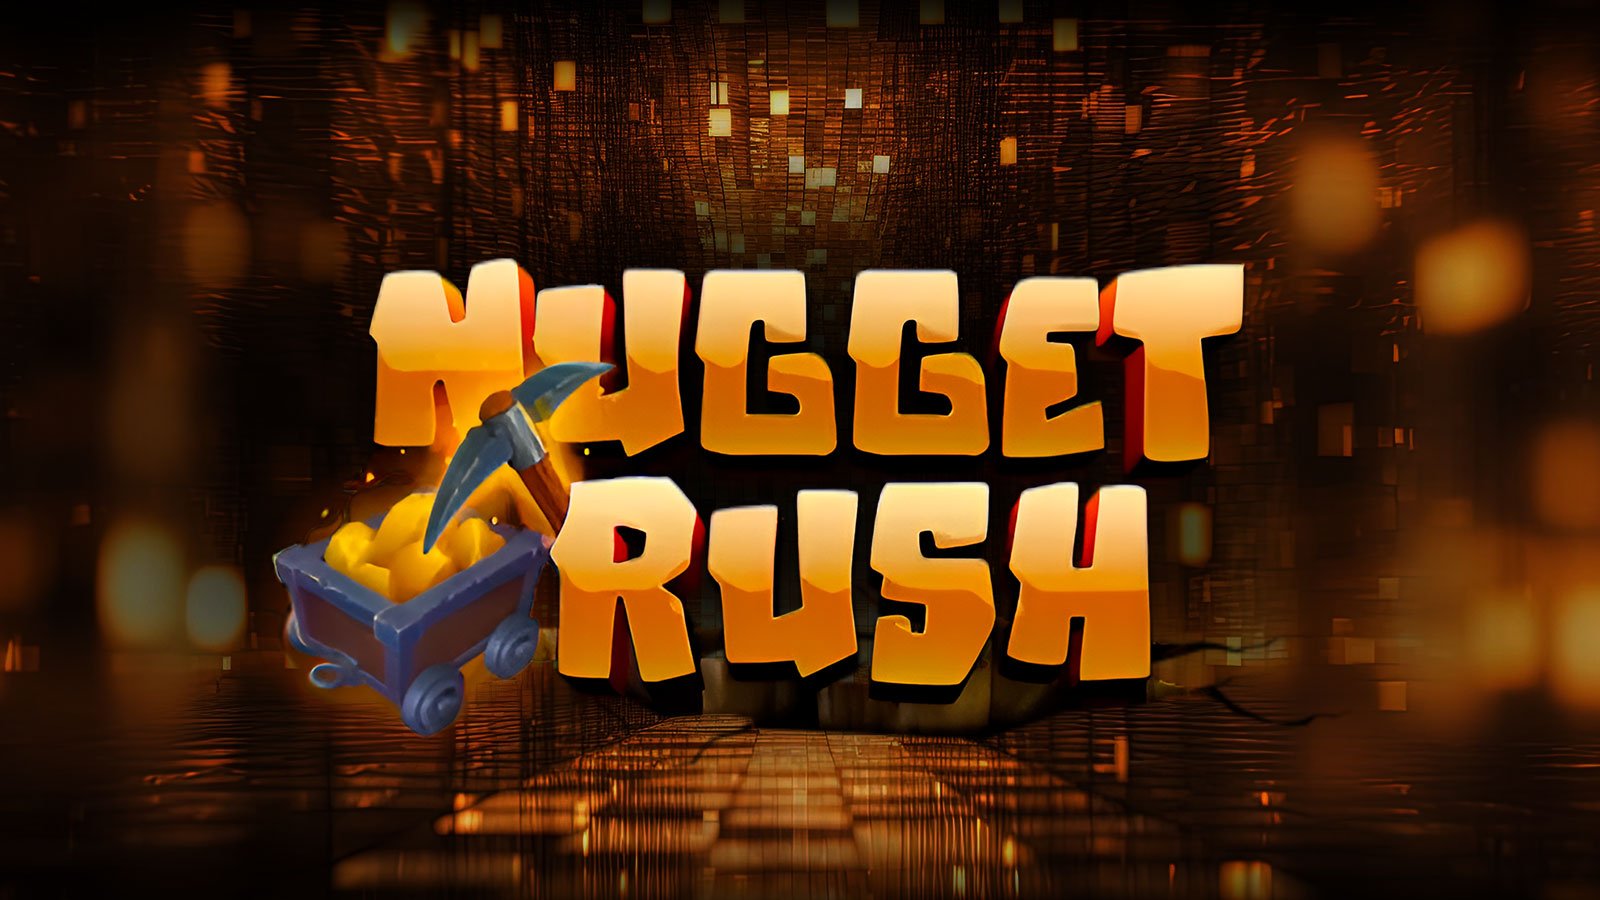 NuggetRush: Gamify Mining with NFTs, Gold Prizes